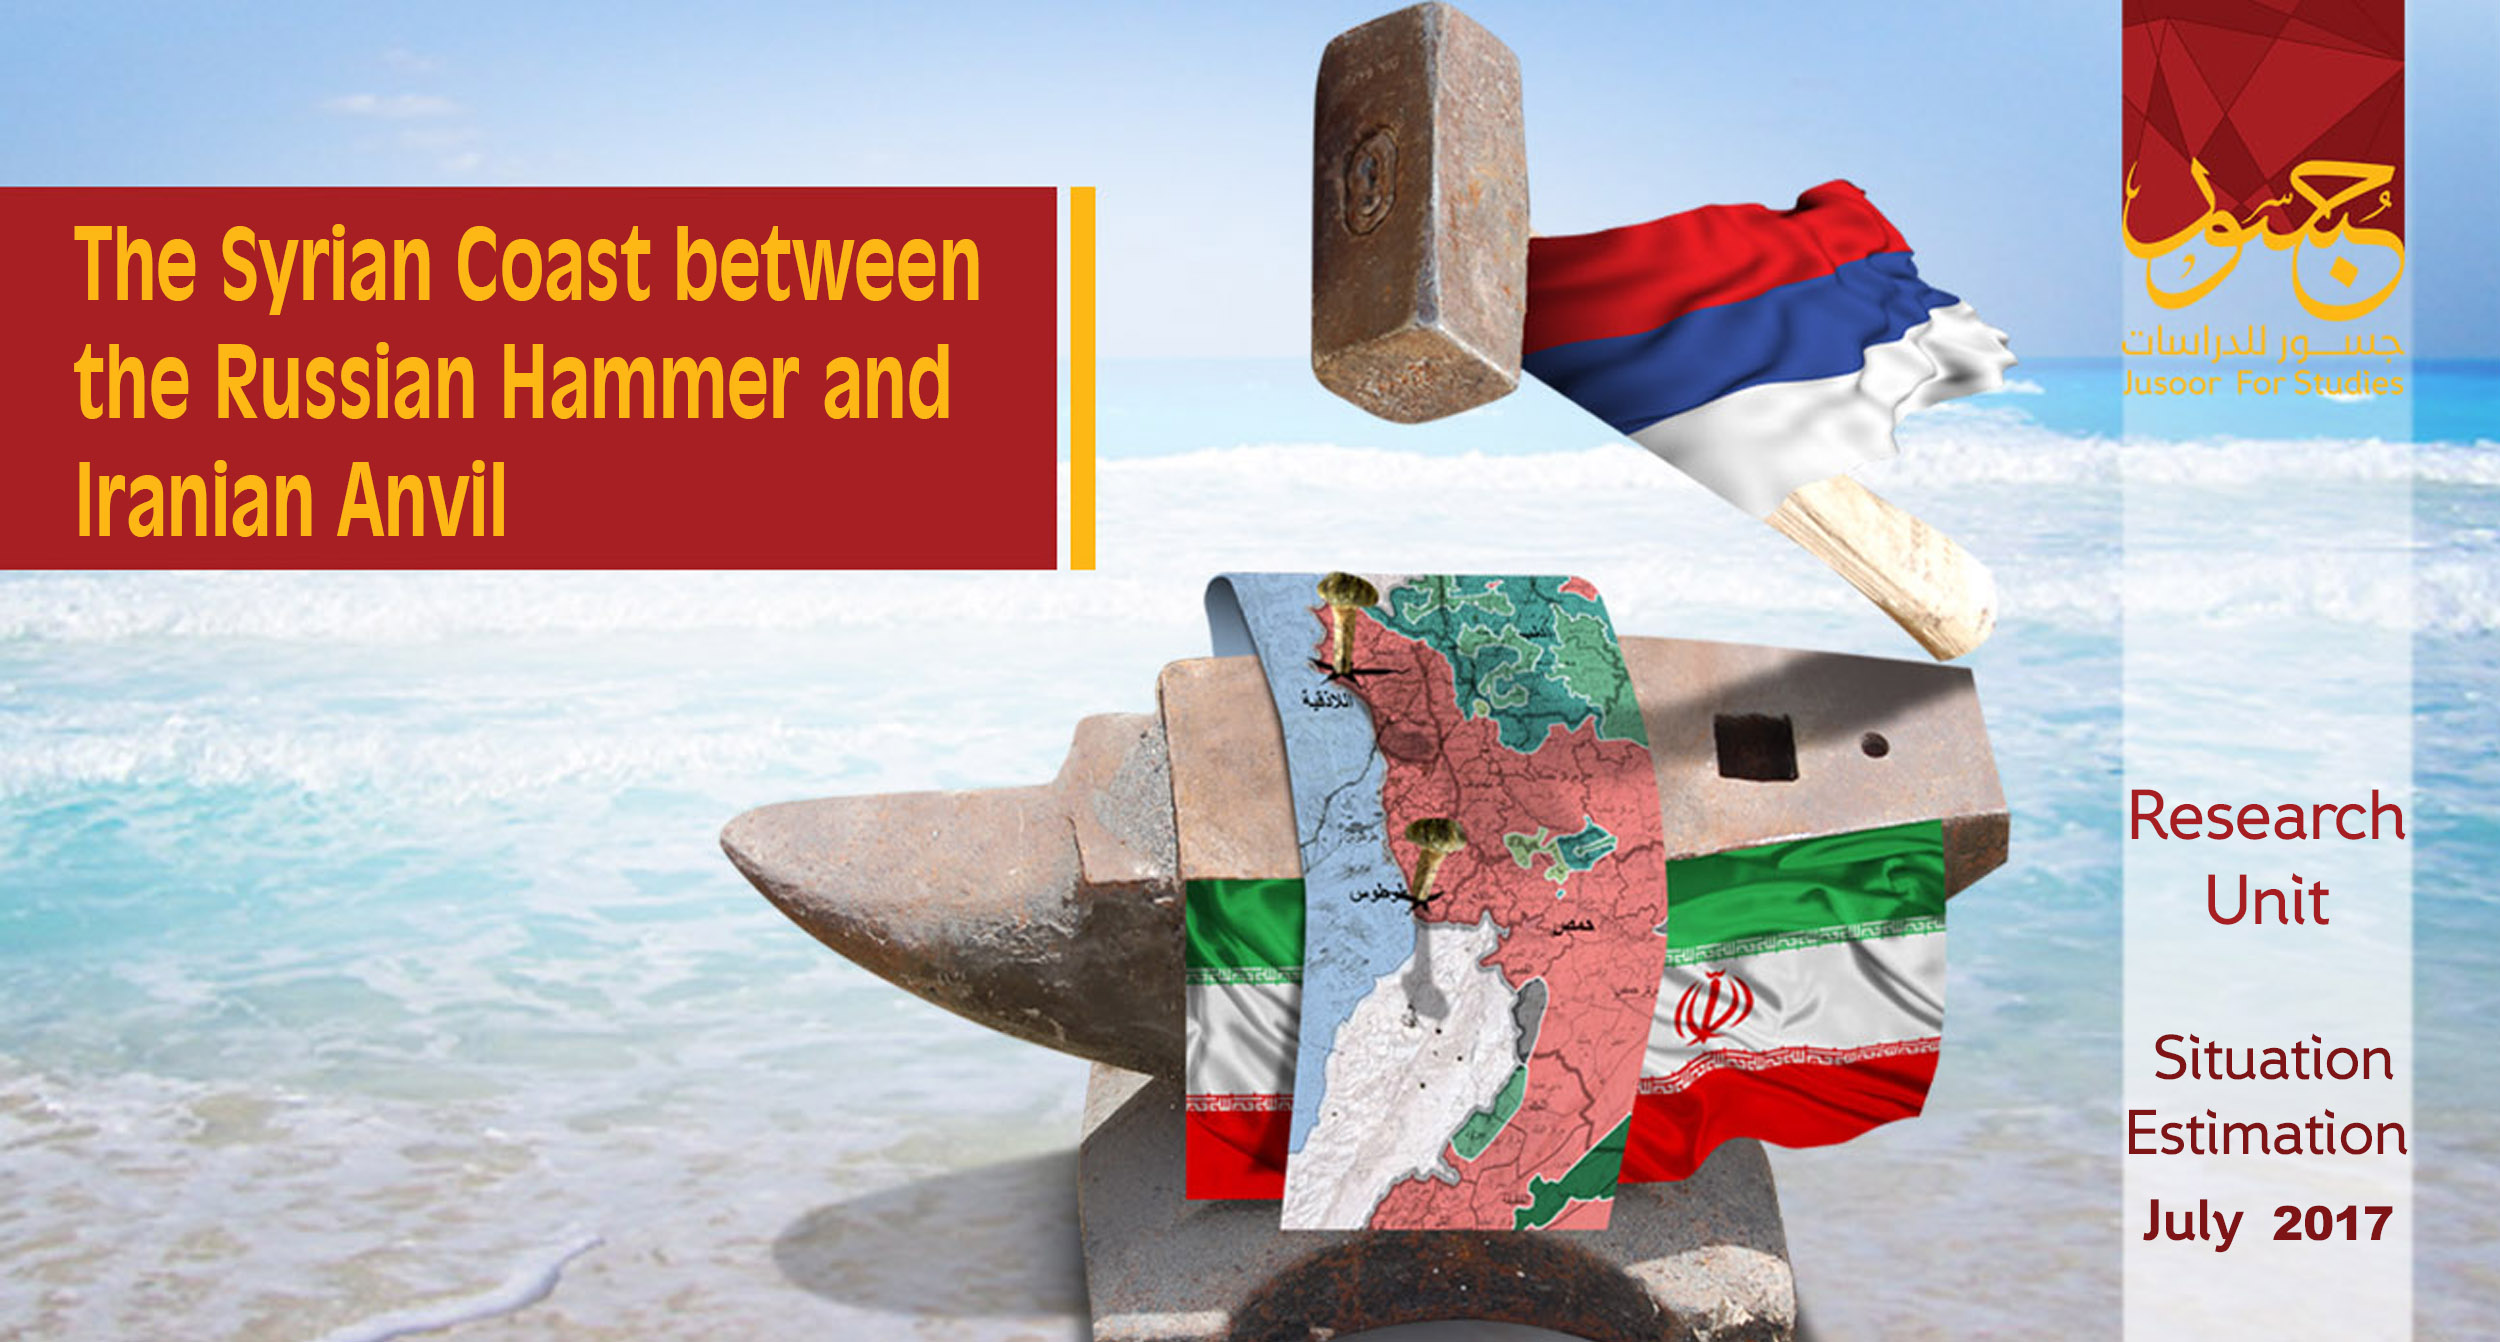 The Syrian Coast between the Russian Hammer and Iranian Anvil